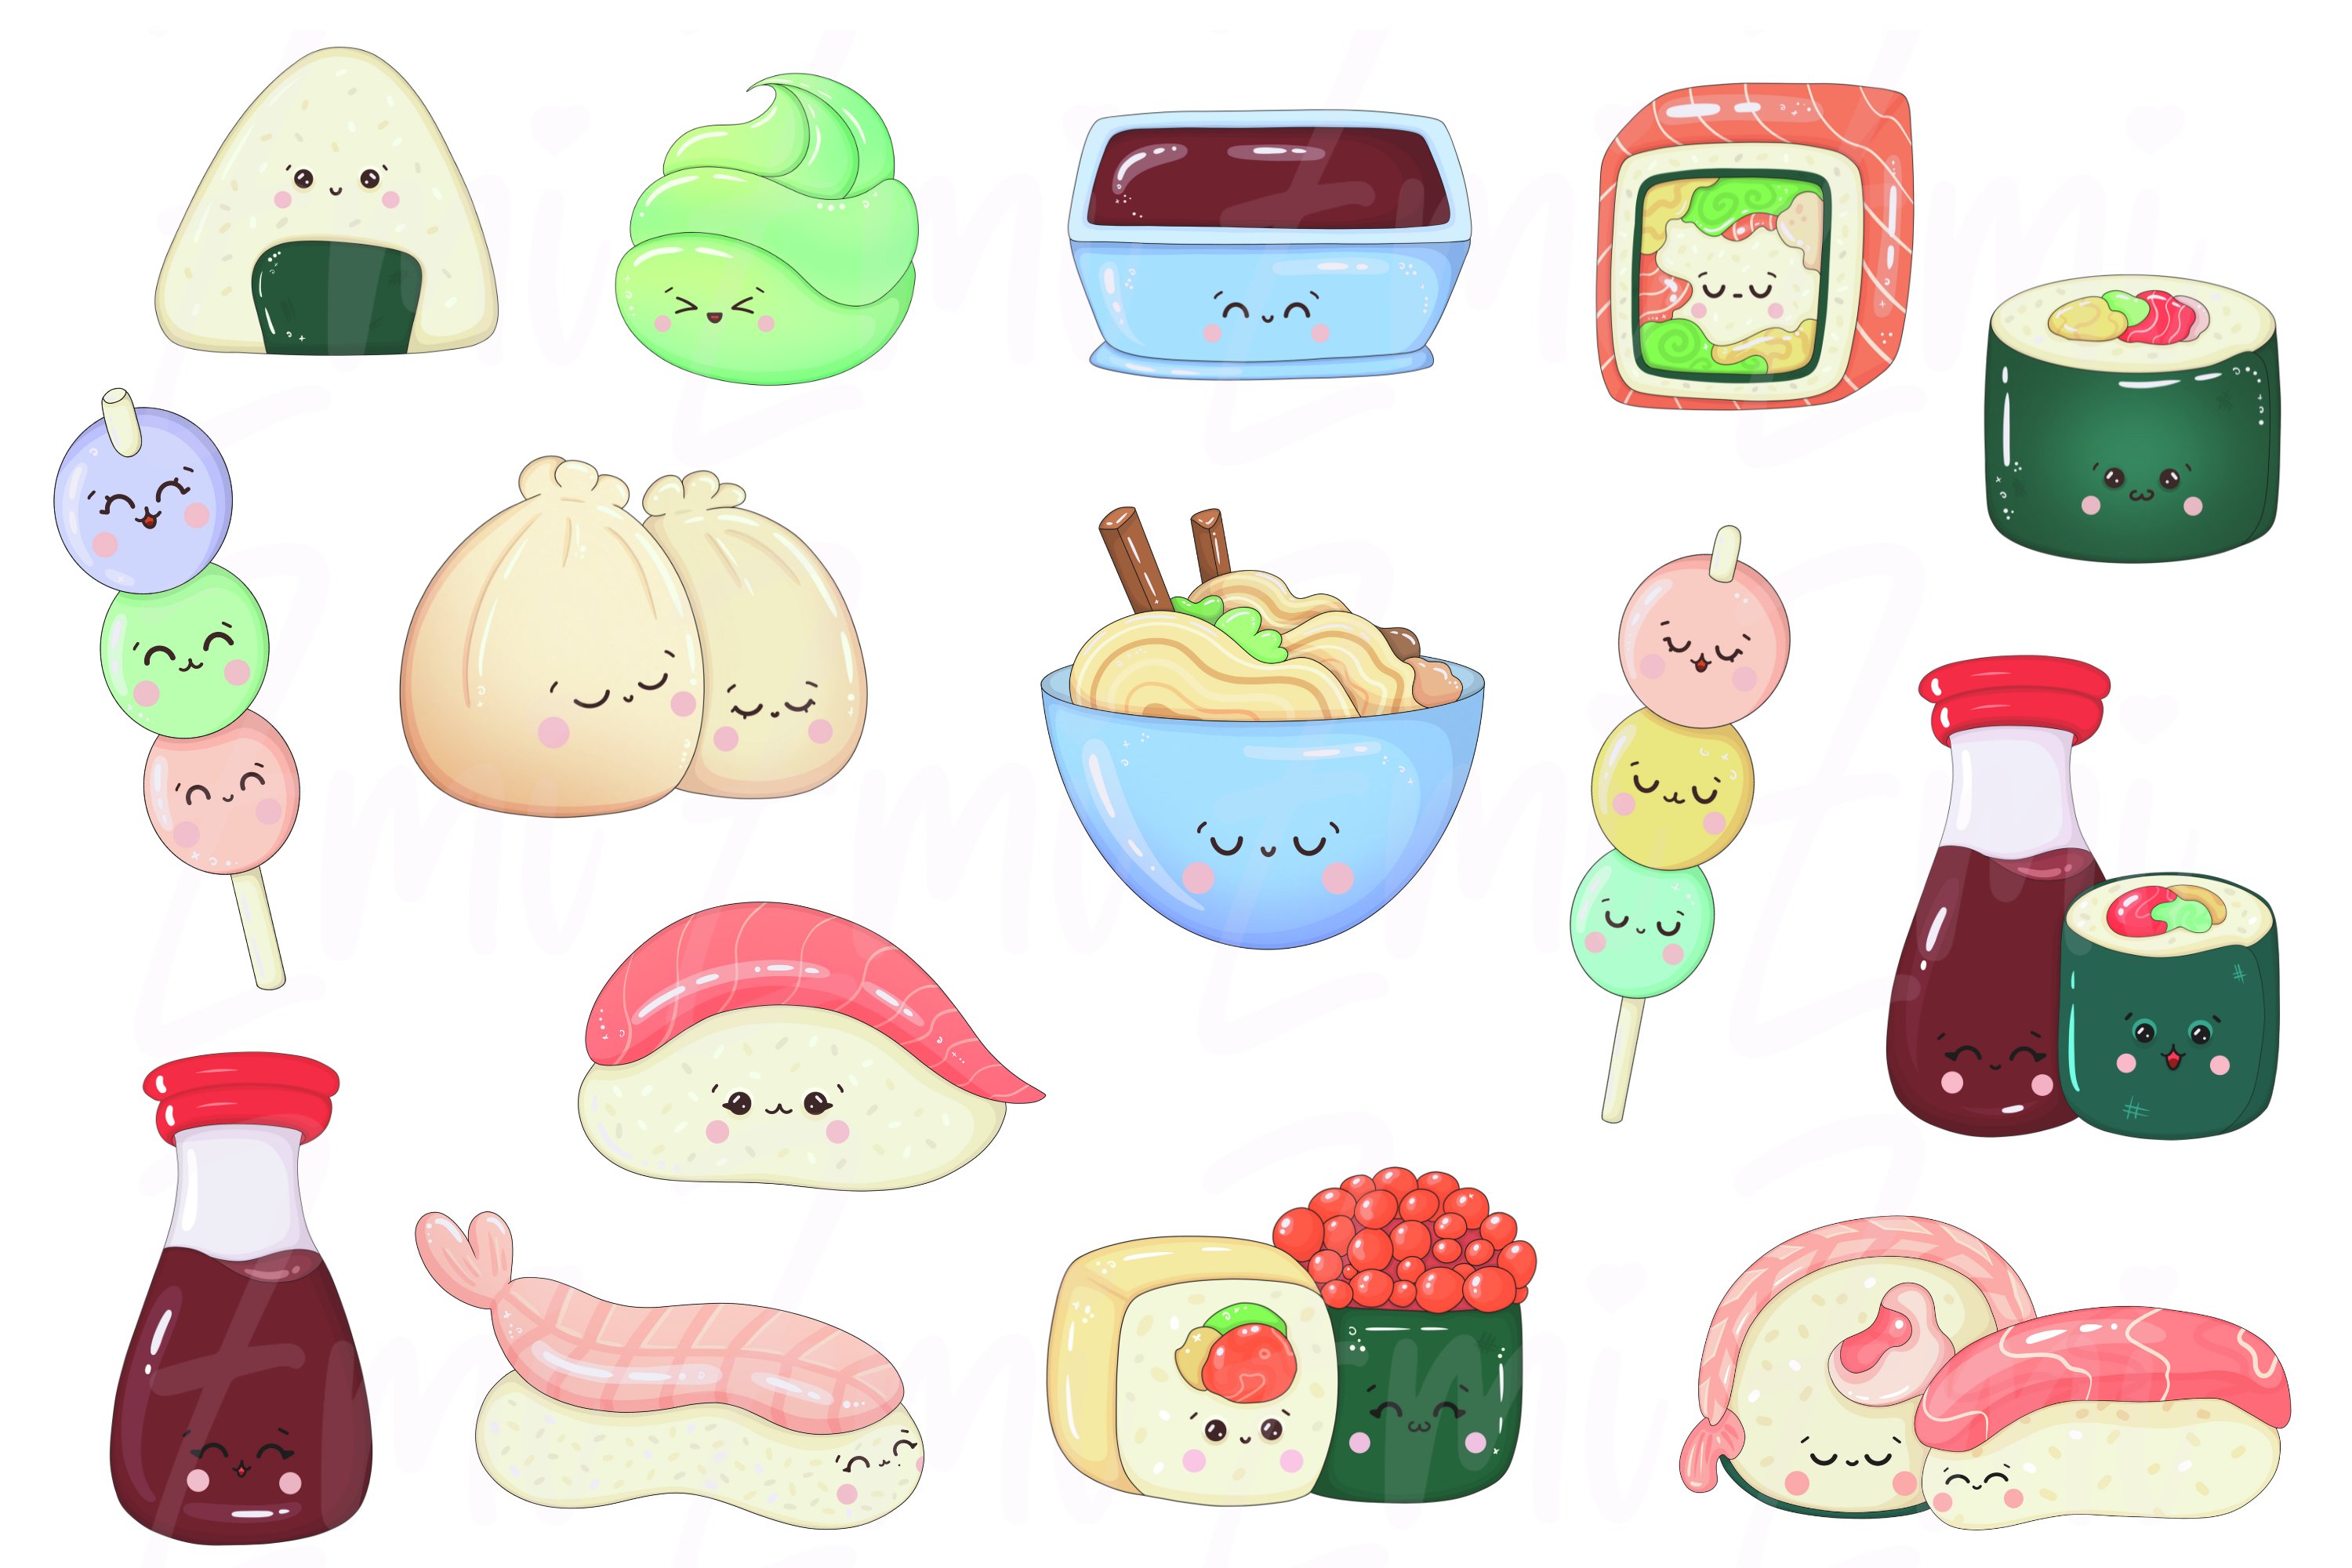 Bundle of different kawaii sushi illustrations on a white background.